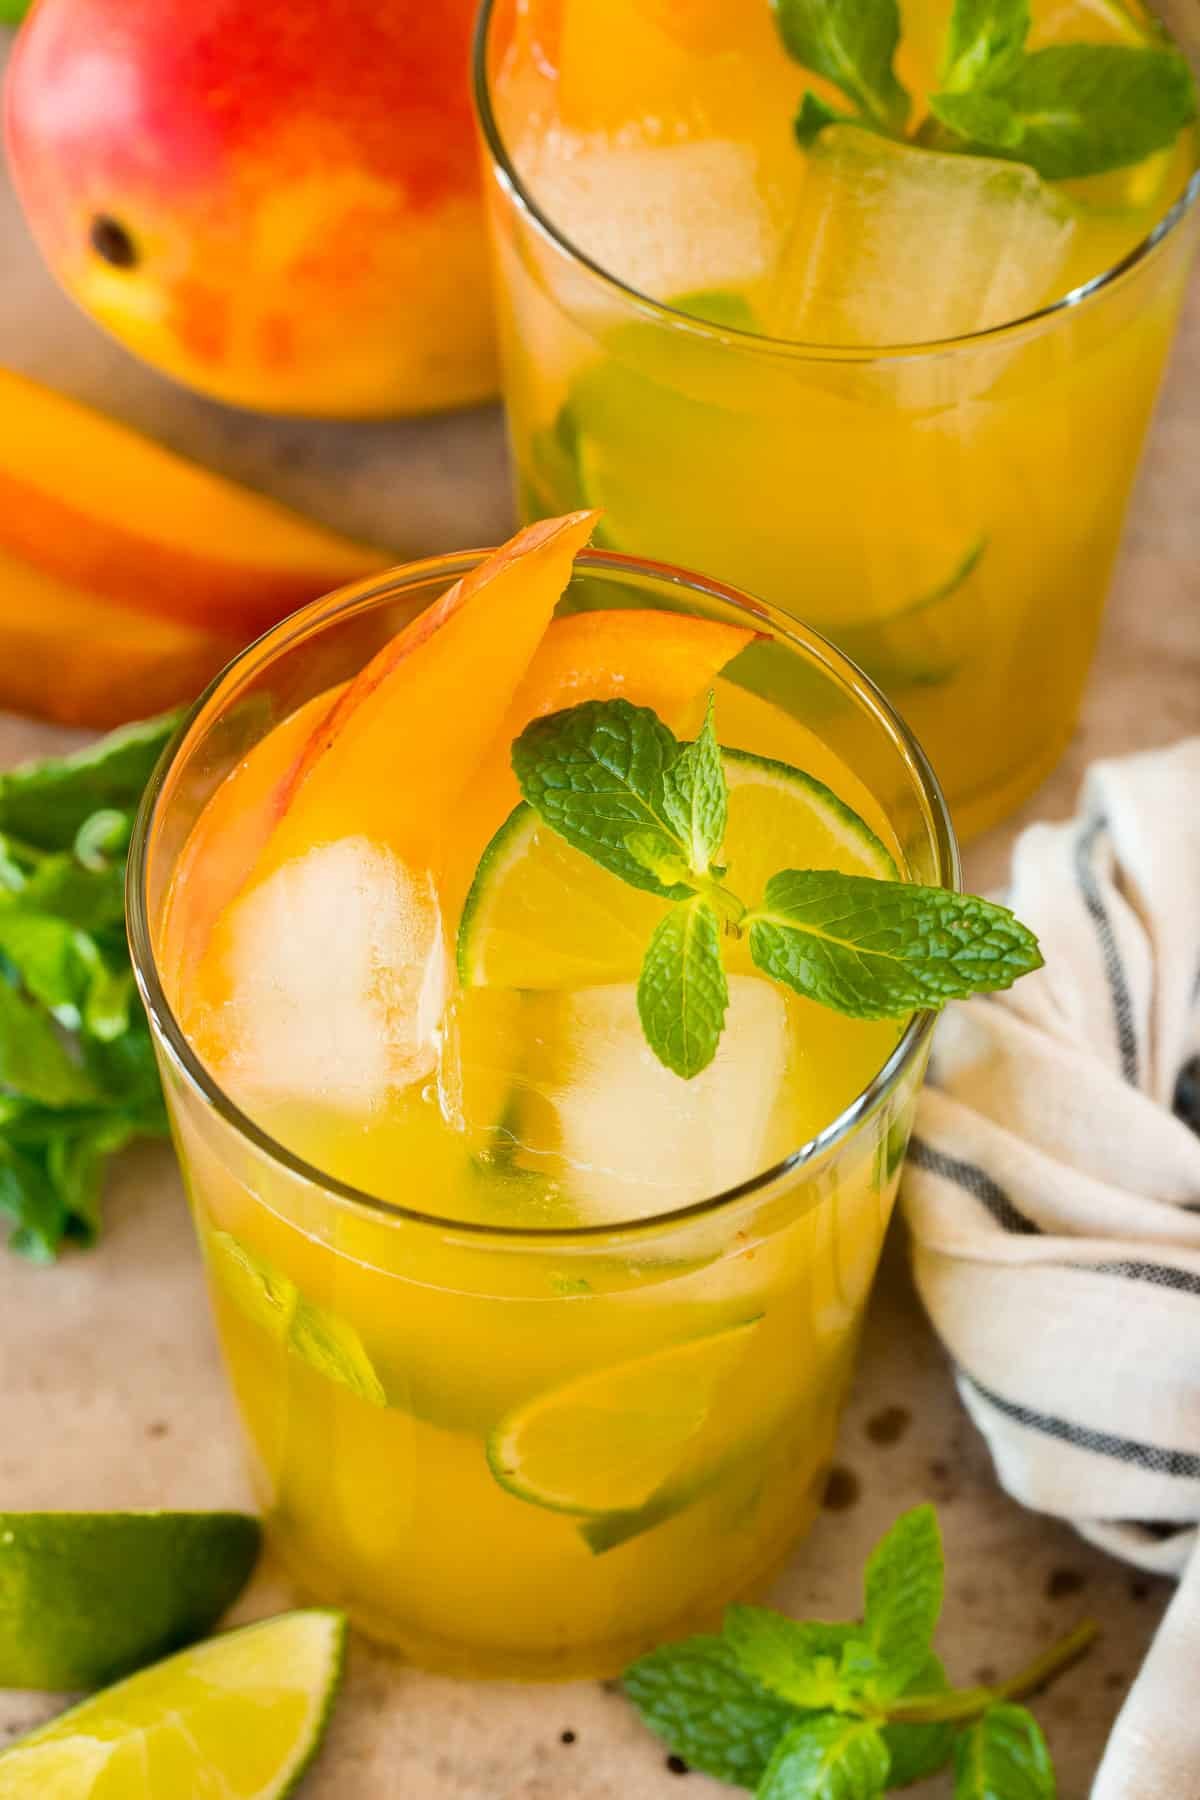 Cups of mango mojito with ice, mint and mango slices.